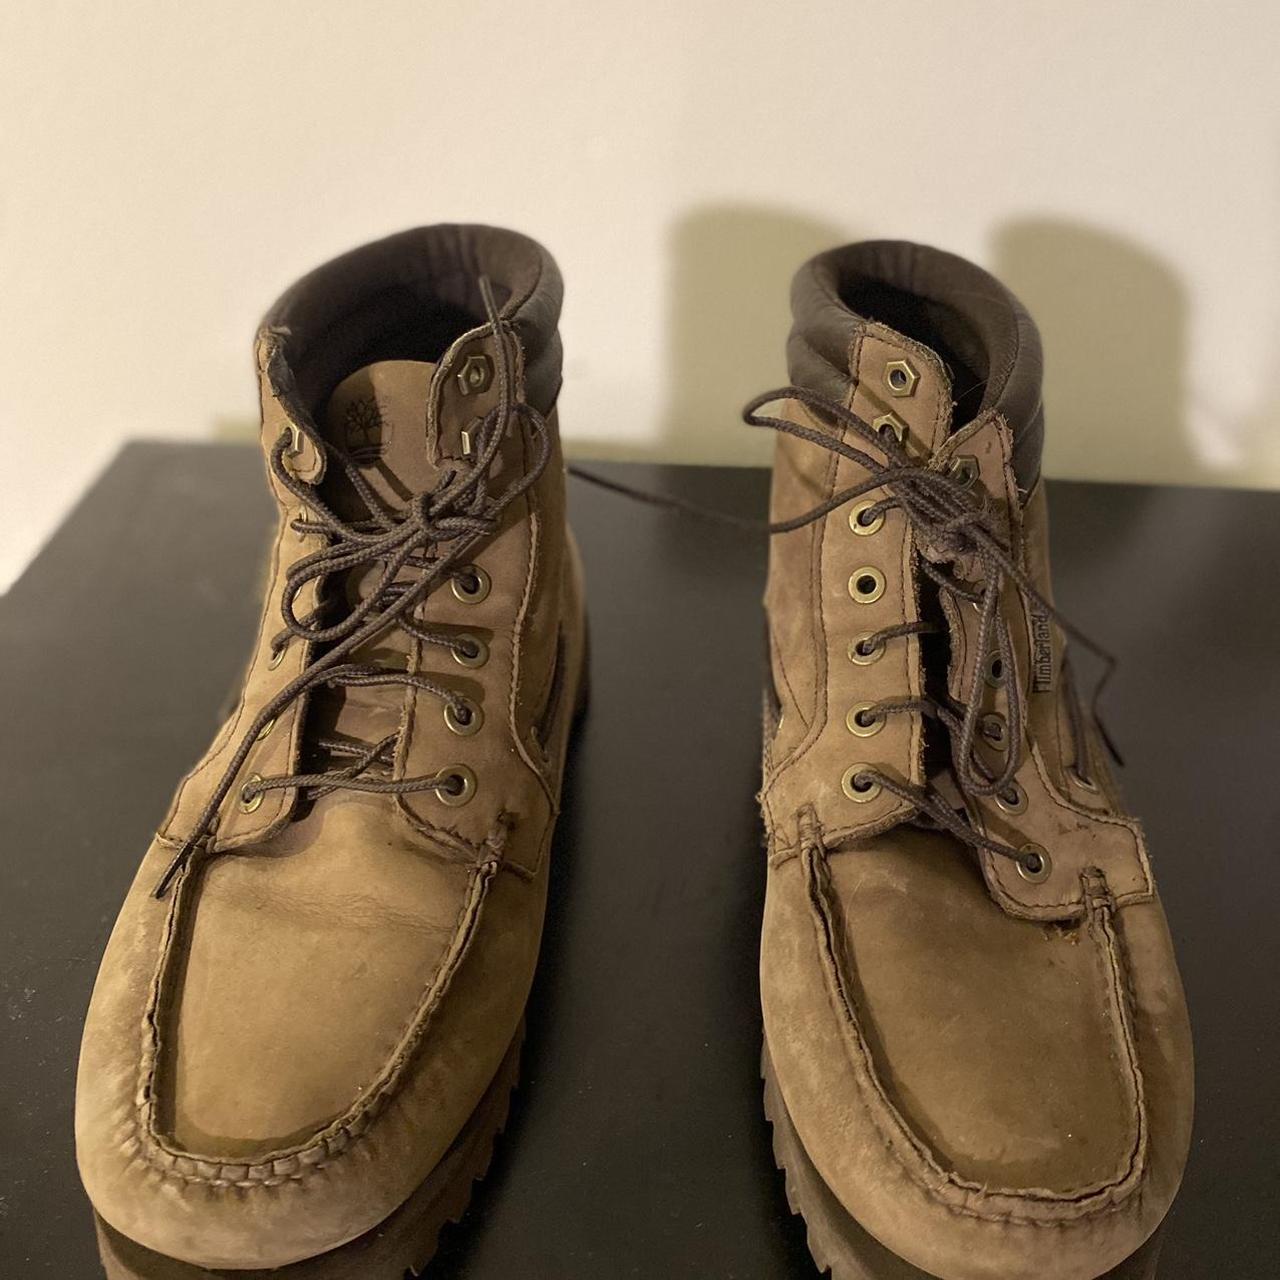 MEN’S BOOTS - Timberland boots. Size 10. In good... - Depop